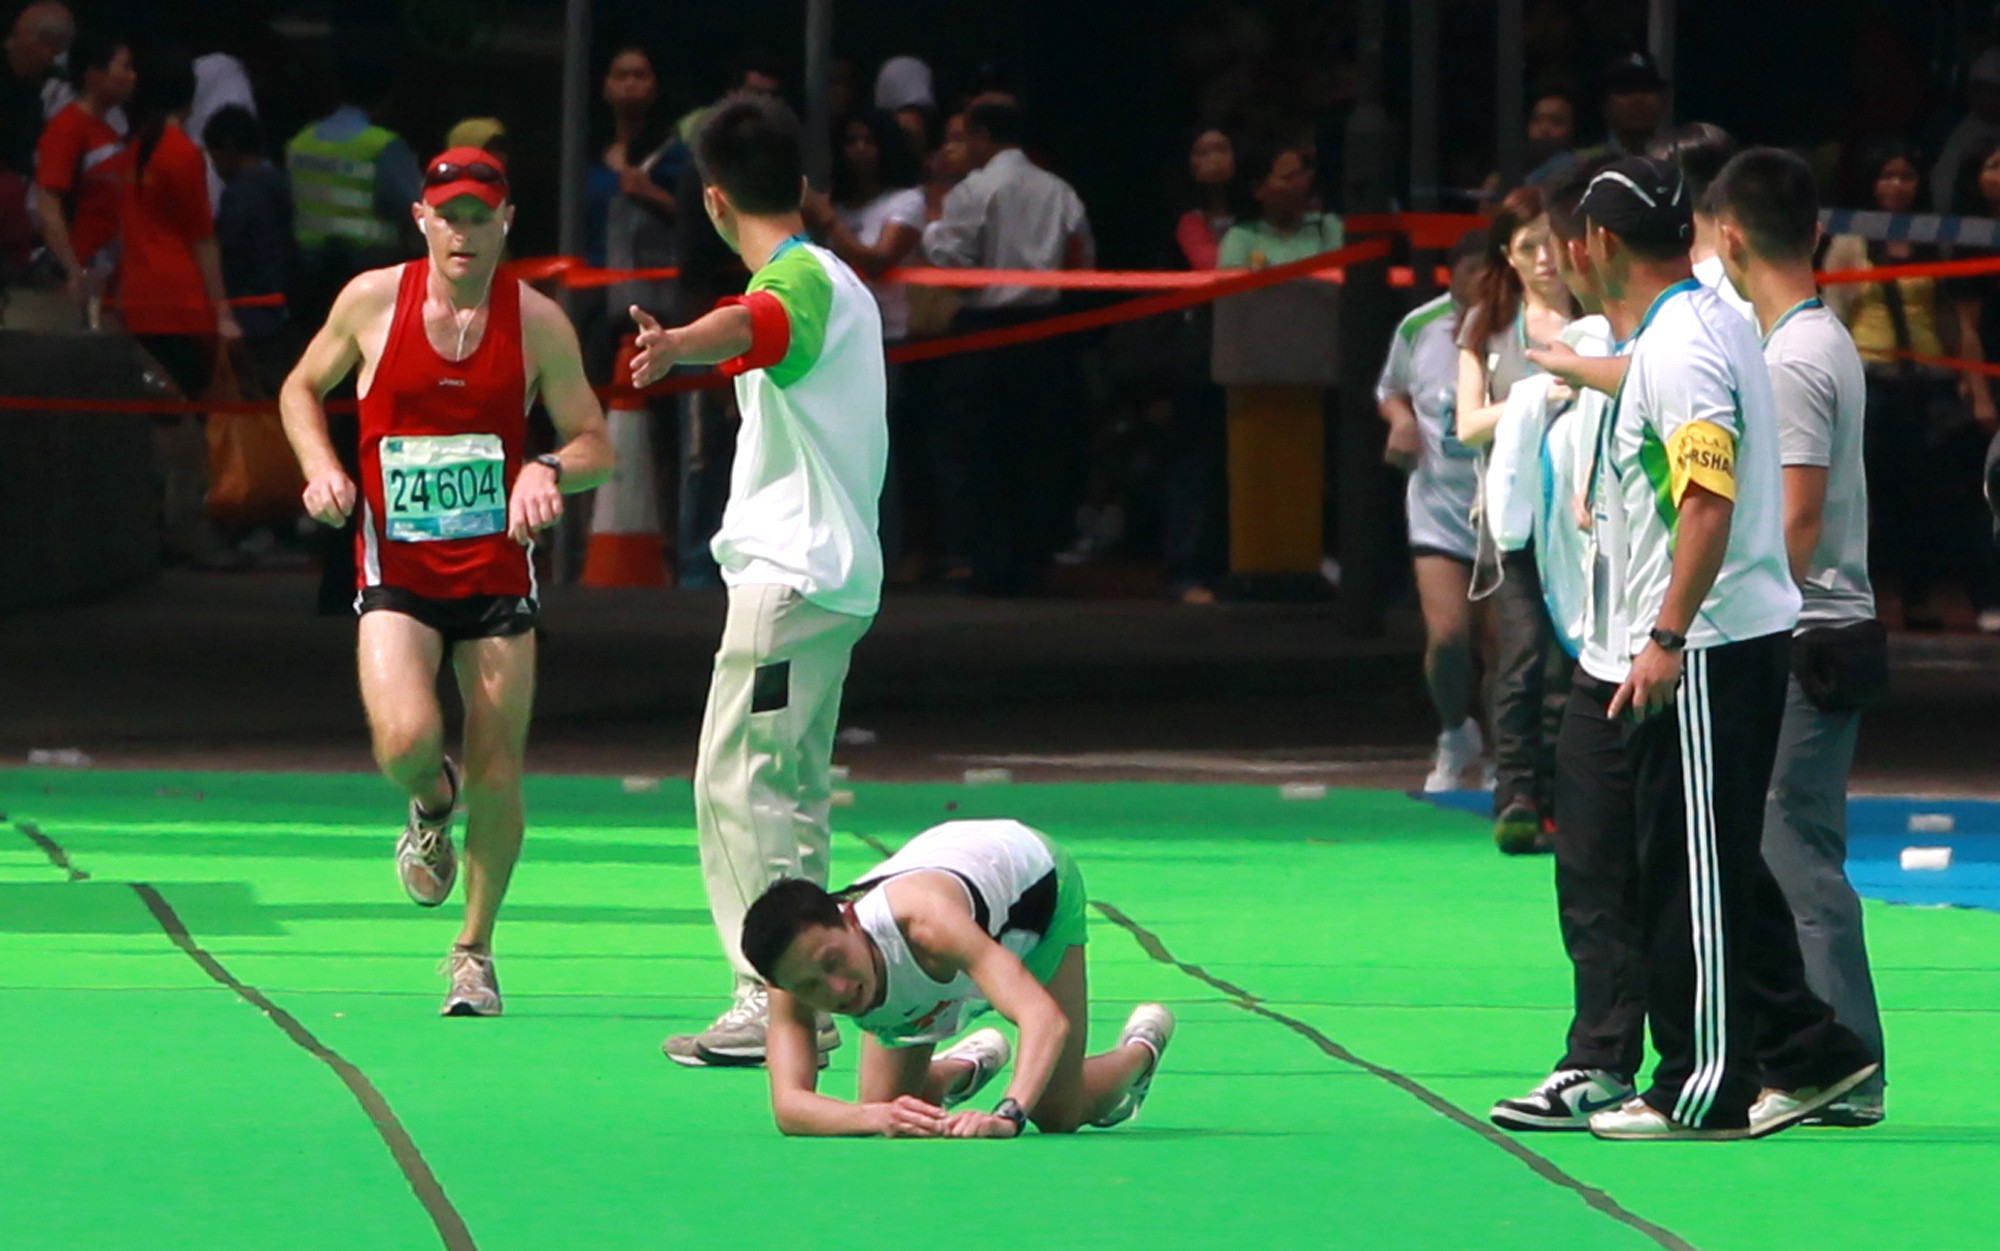 A runner collapses approaching the finish line at Victoria Park in the Hong Kong Marathon. Photo: Felix Wong